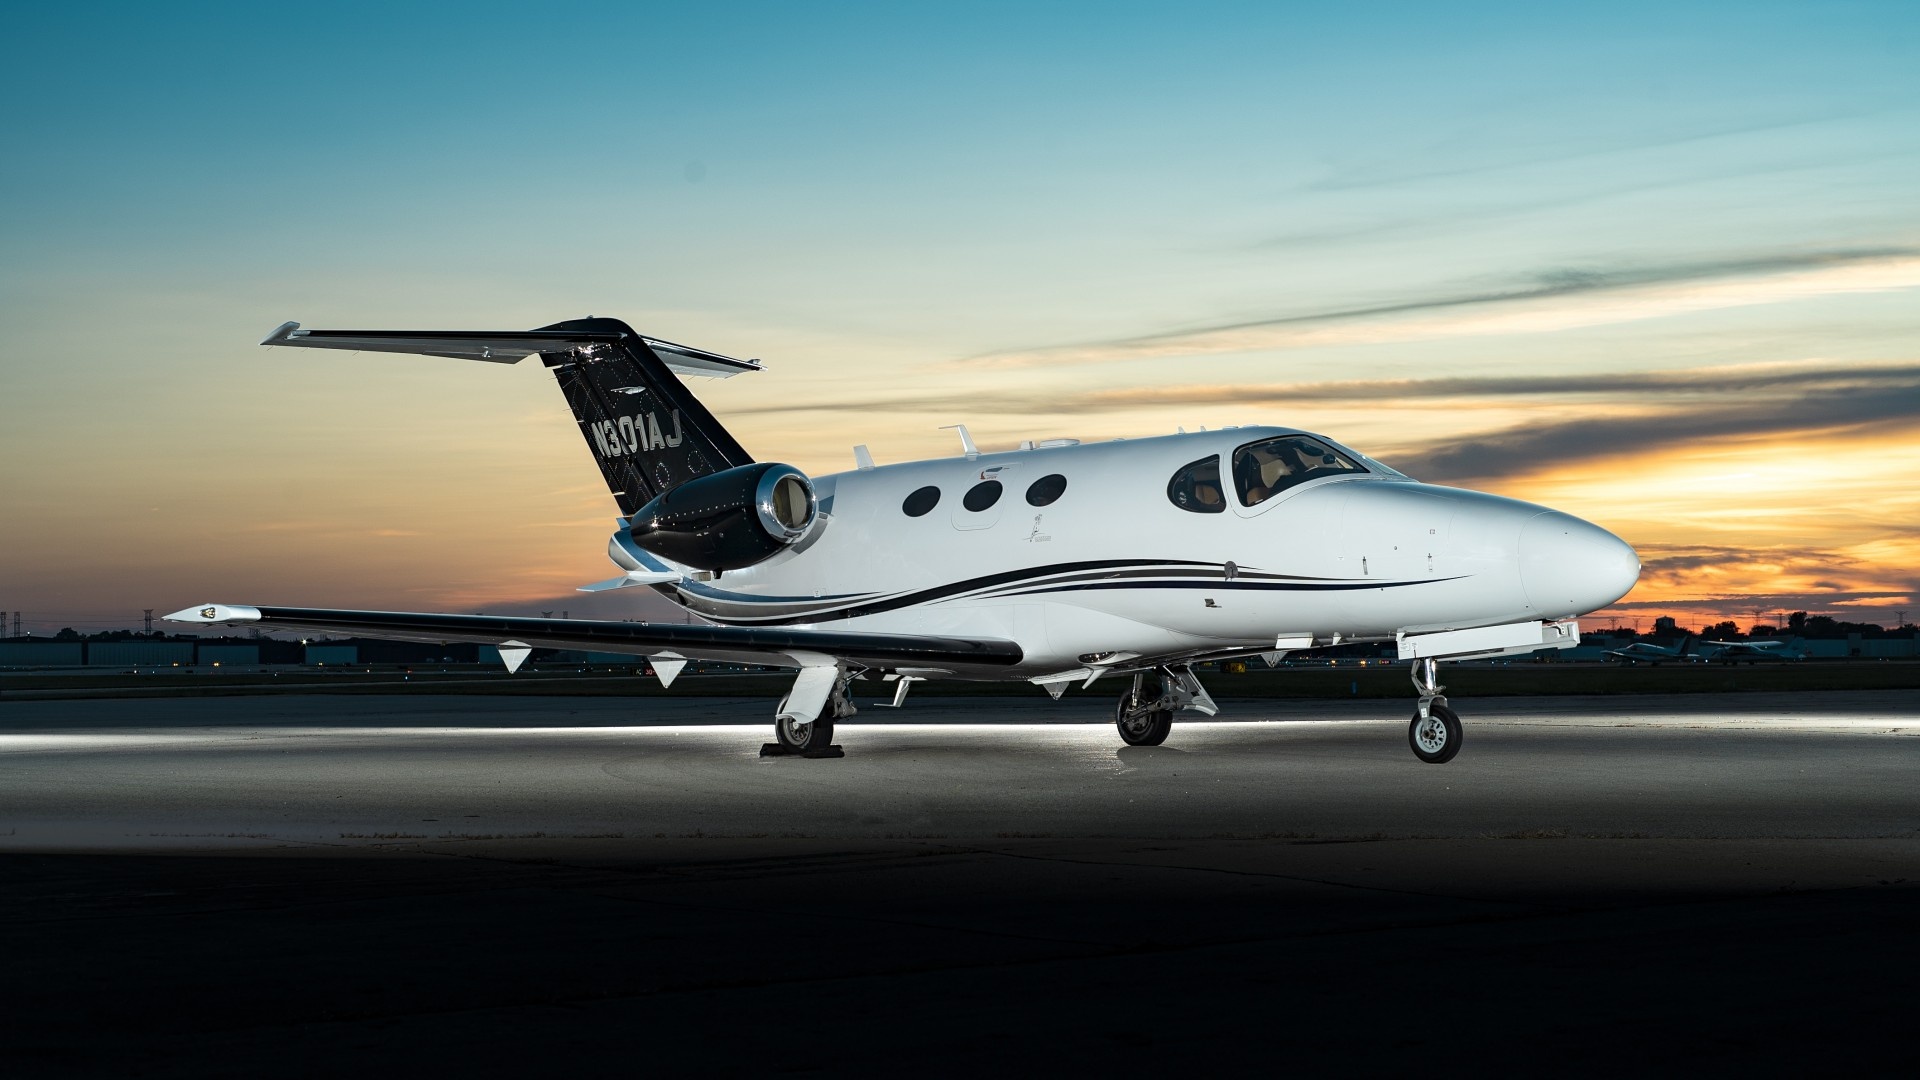 2009 Cessna Citation Mustang for sale 1920x1080